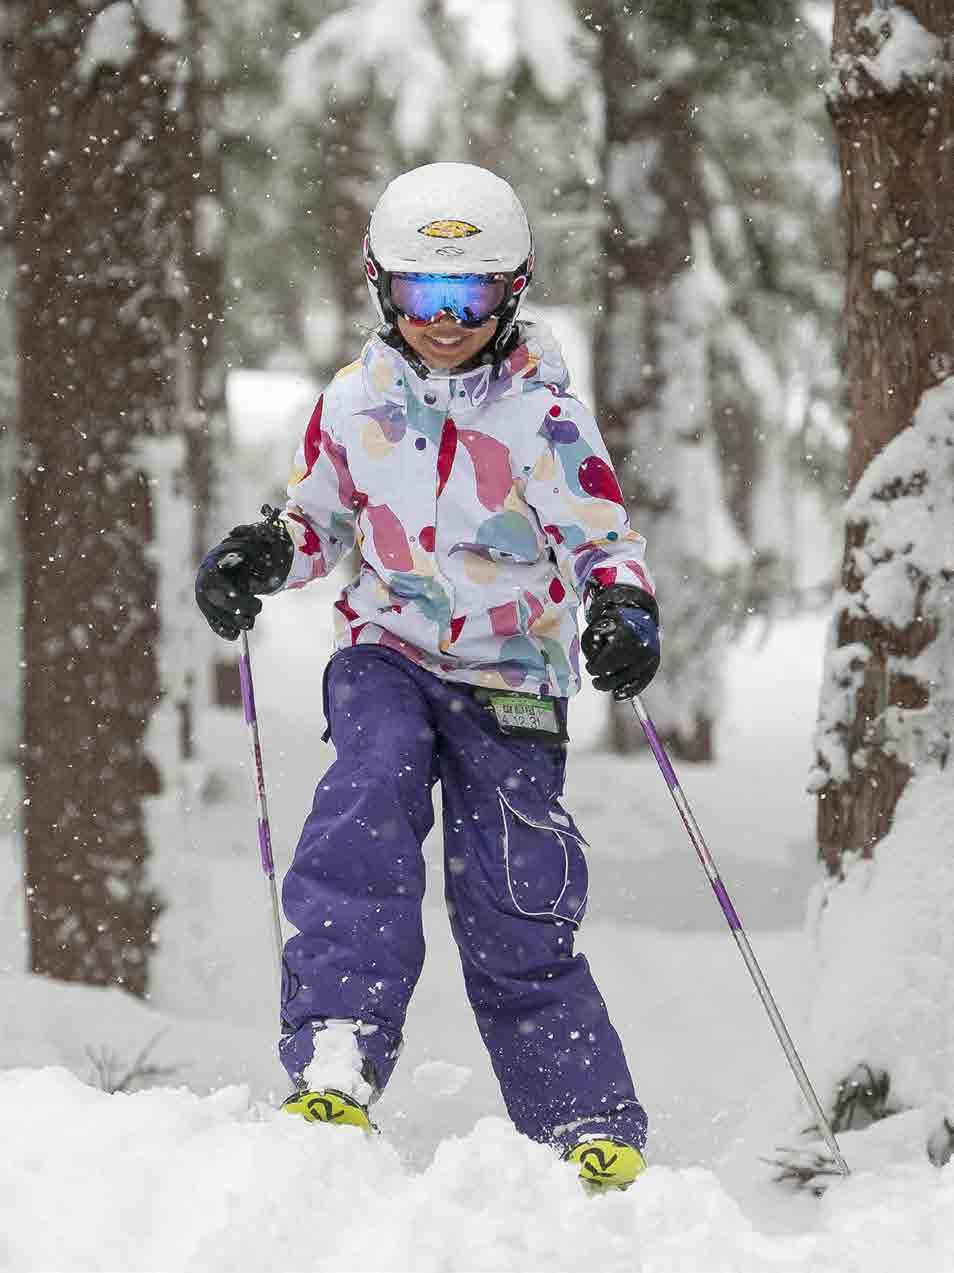 7-14 yrs GROUP SKI PROGRAM Your child has the opportunity to make friends with other group members while exploring the large variety of